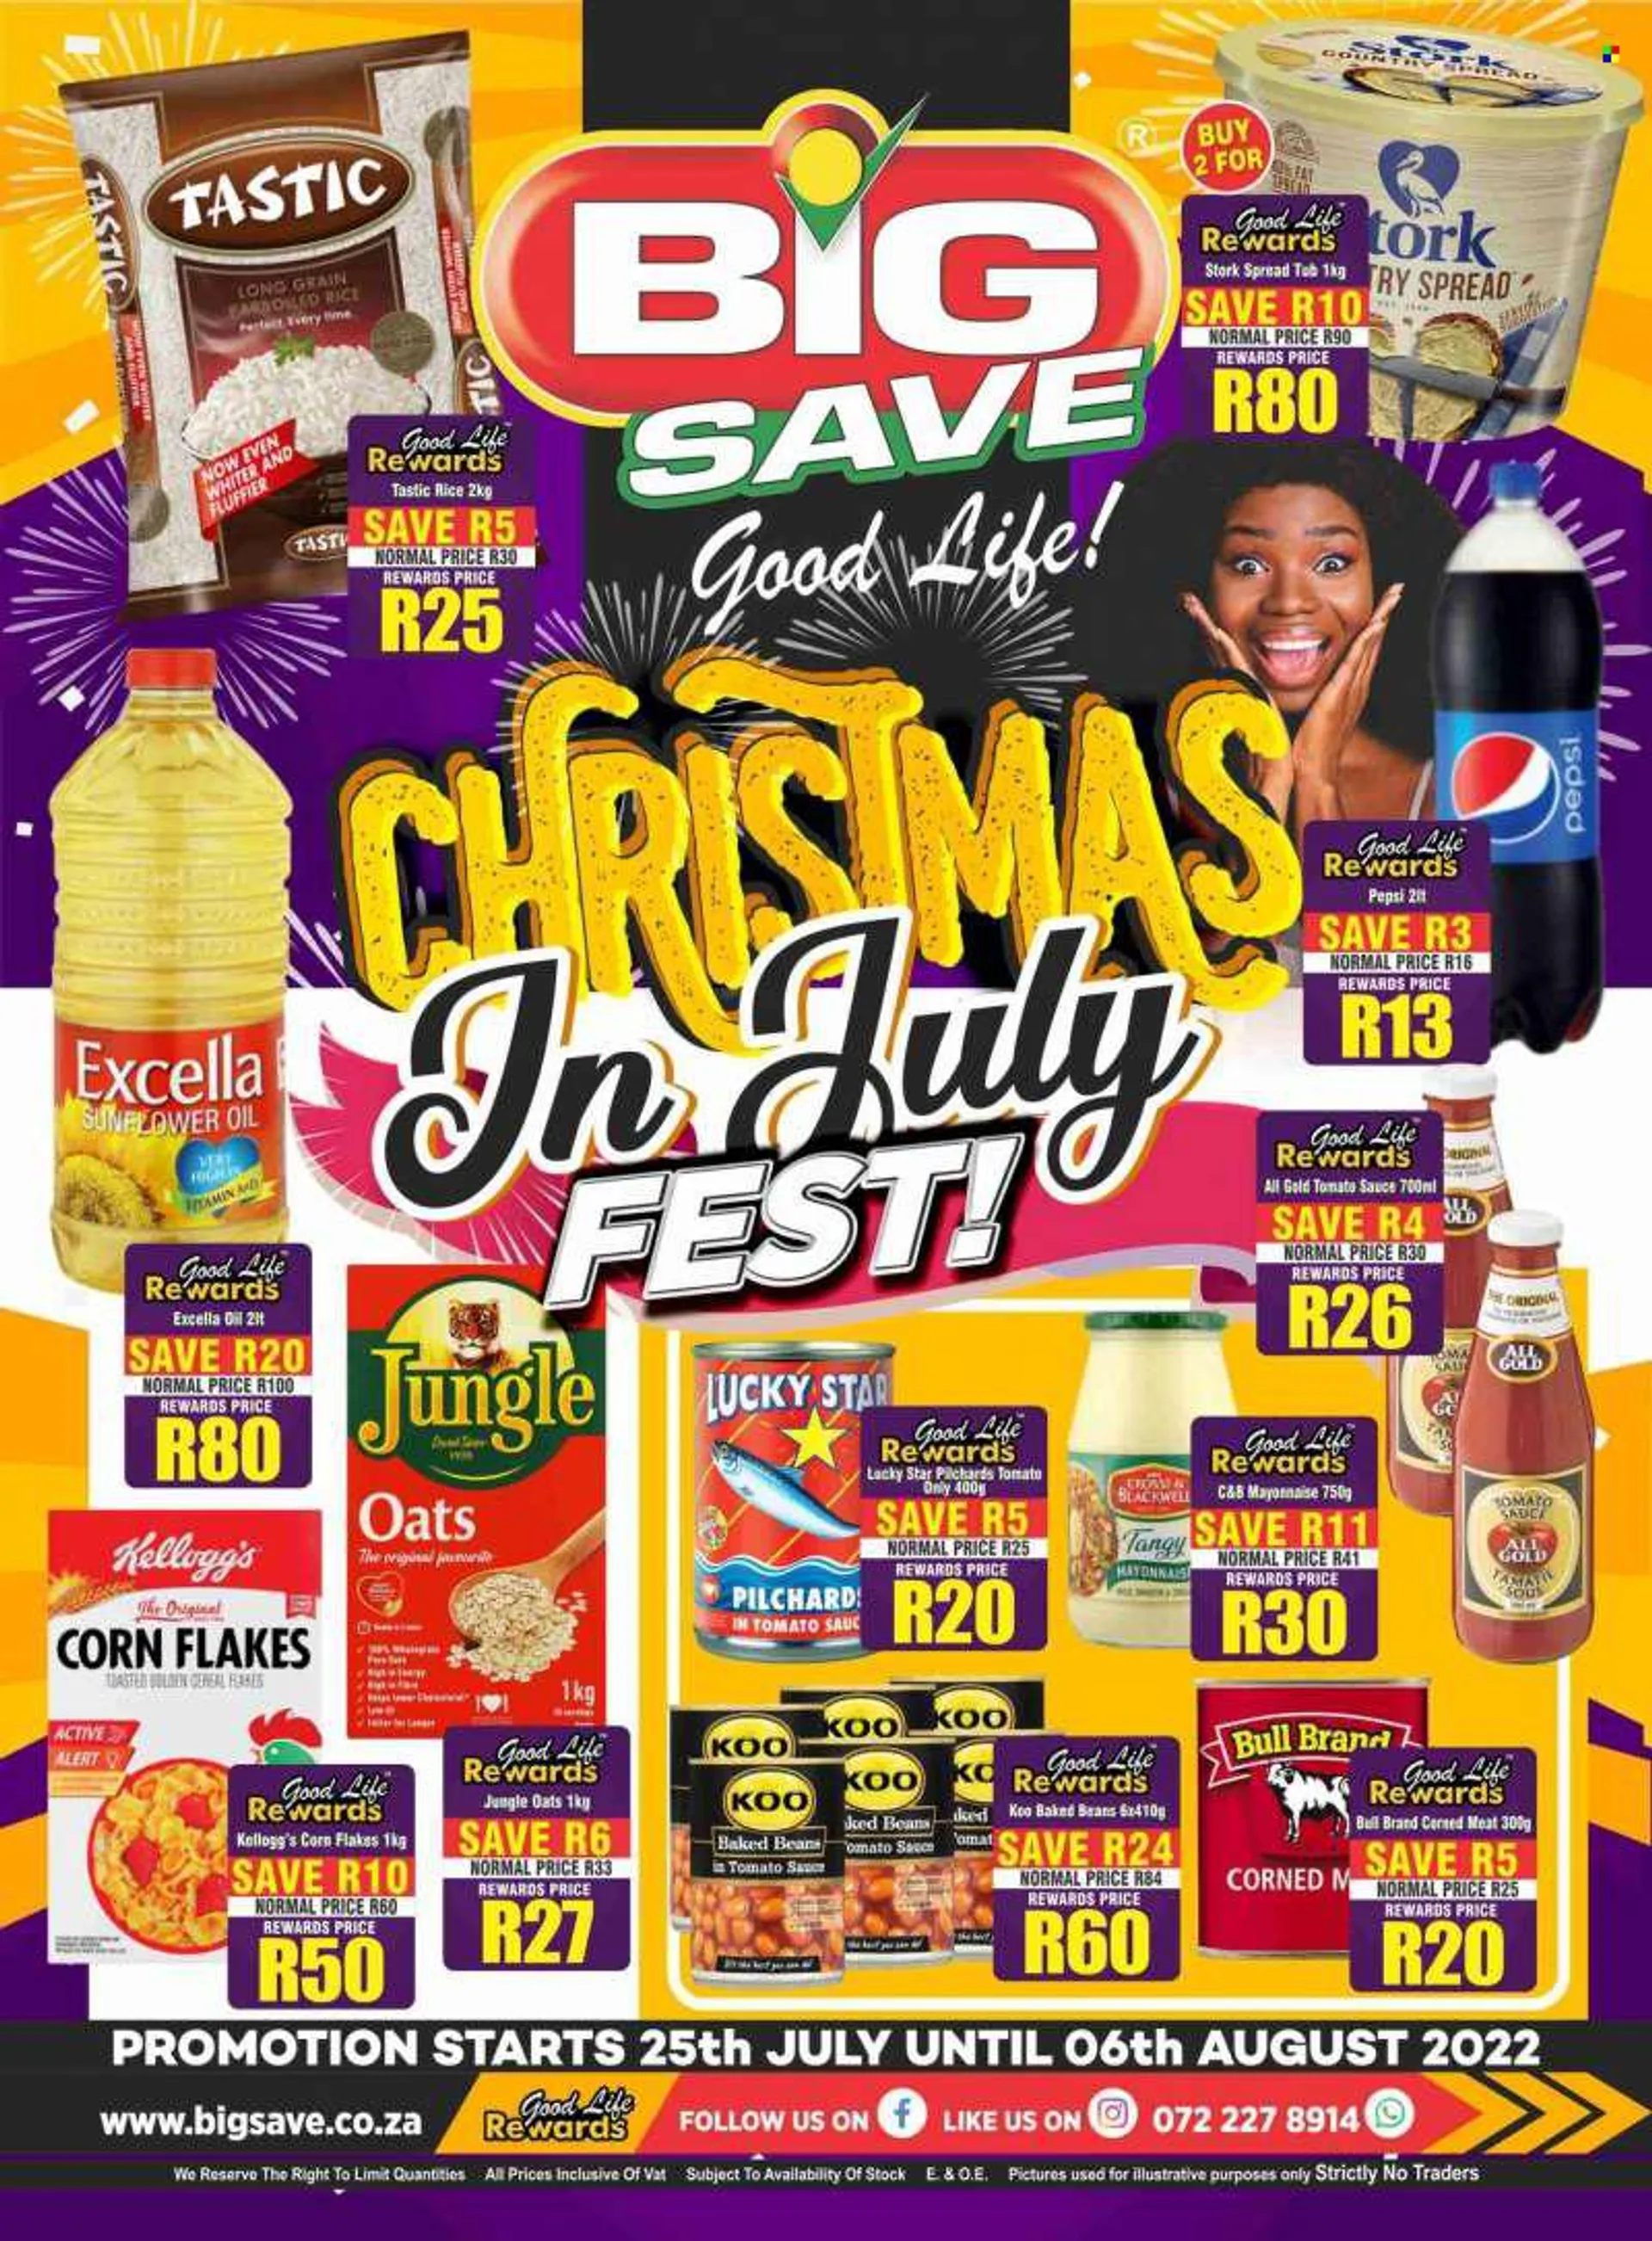 Big Save catalogue  - 25/07/2022 - 06/08/2022 - Sales products - beans, sardines, fat spread, mayonnaise, Kelloggs, oats, corned meat, baked beans, Koo, cereals, corn flakes, jungle oats, rice, parboiled rice, Tastic, Good Life, sunflower oil, oil, Pepsi.